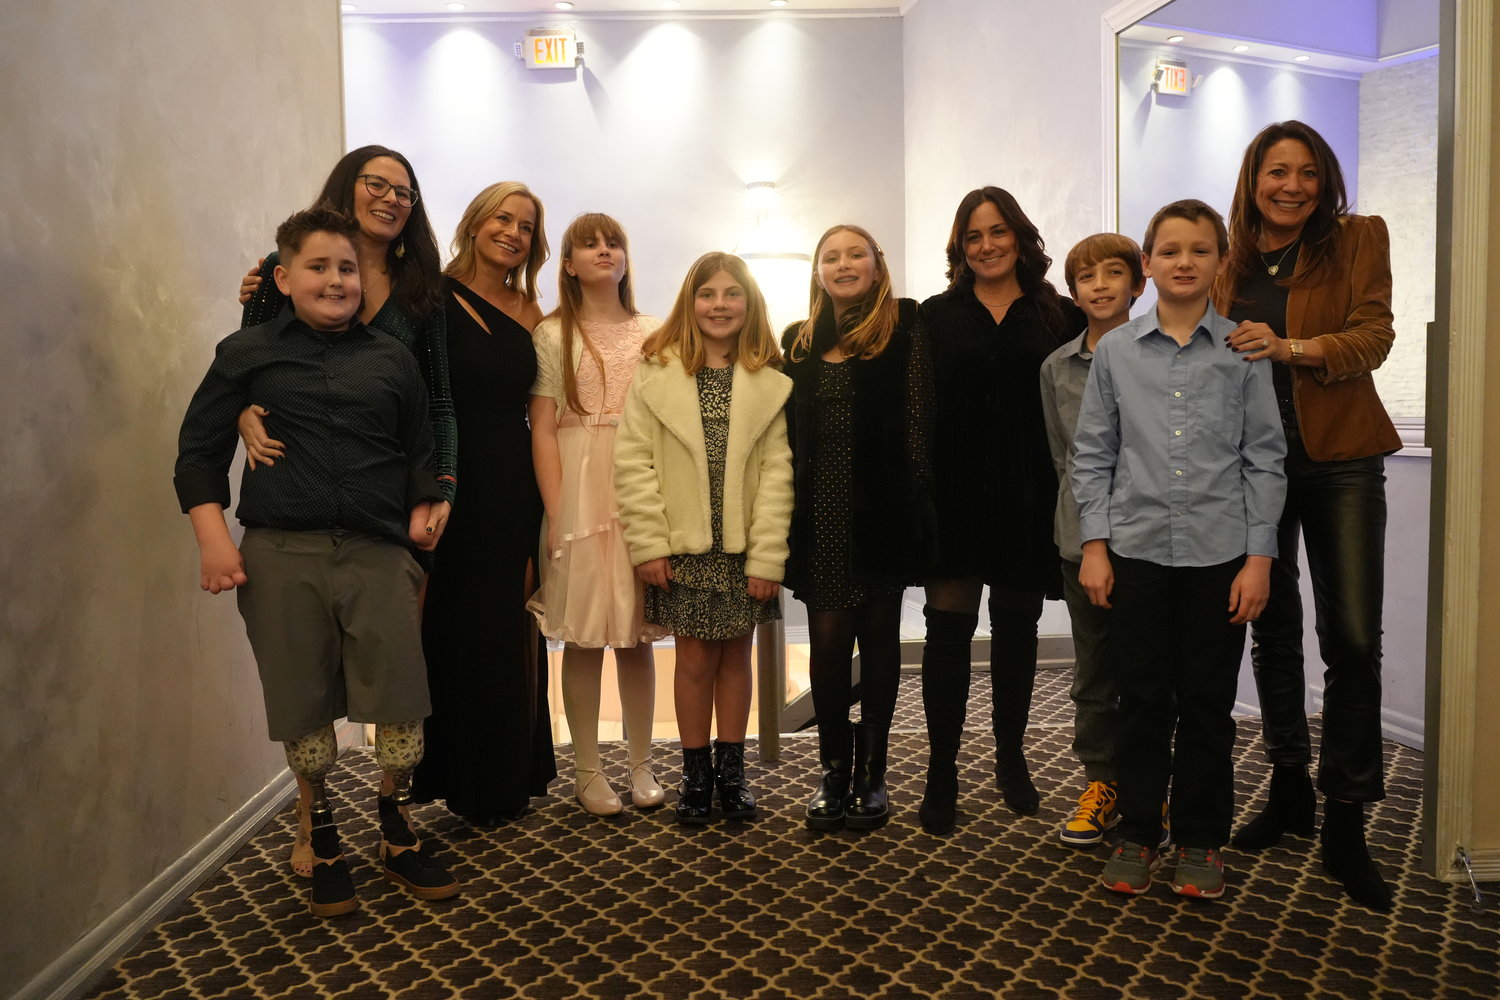 Students and staff from Oceanside’s School No. 5 Project Extra with Ethan Sappington, far left, whom they sponsored for the event, and Show Your Shine founder Jill Smith, third from left.